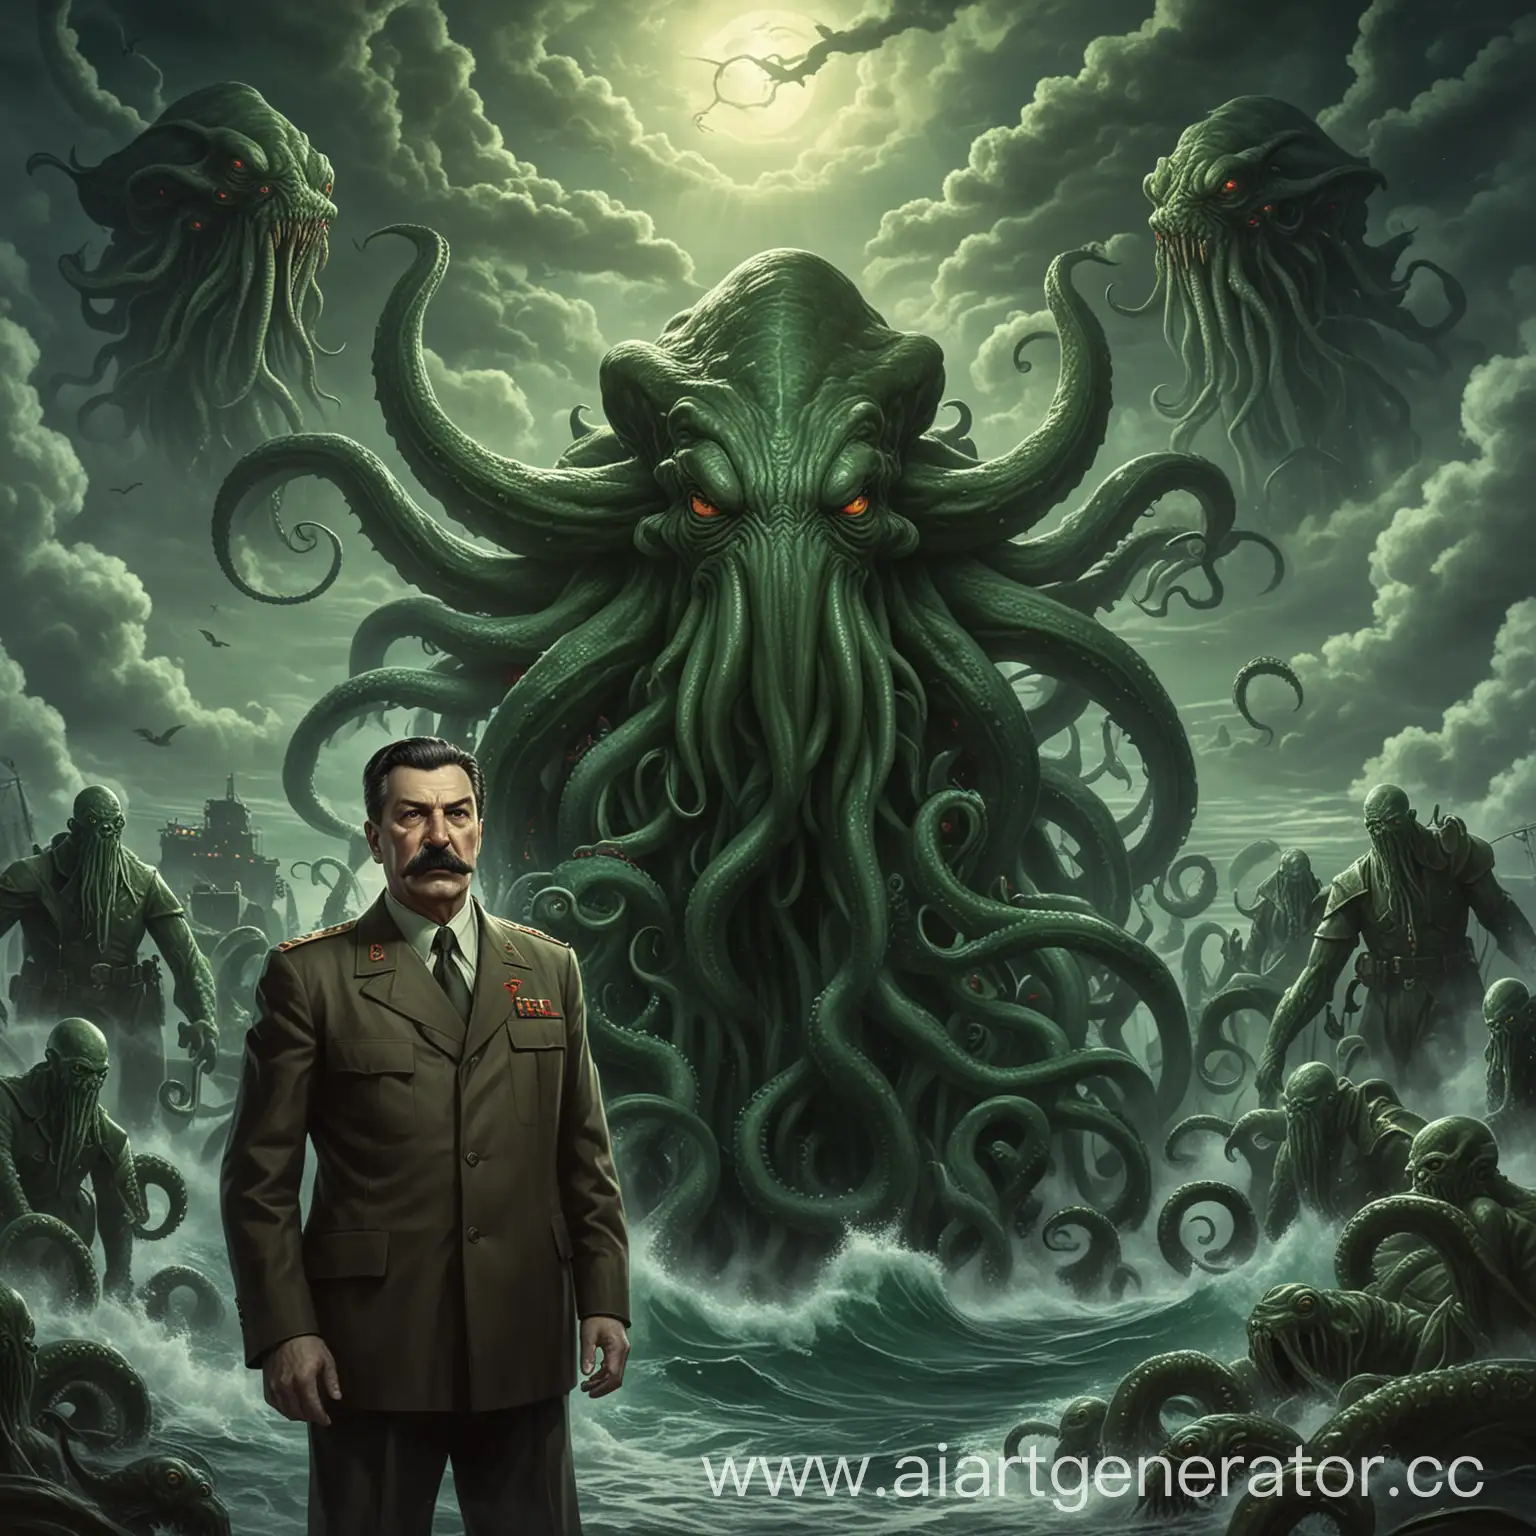 Stalin-and-Cthulhu-Meeting-in-a-Lovecraftian-Encounter